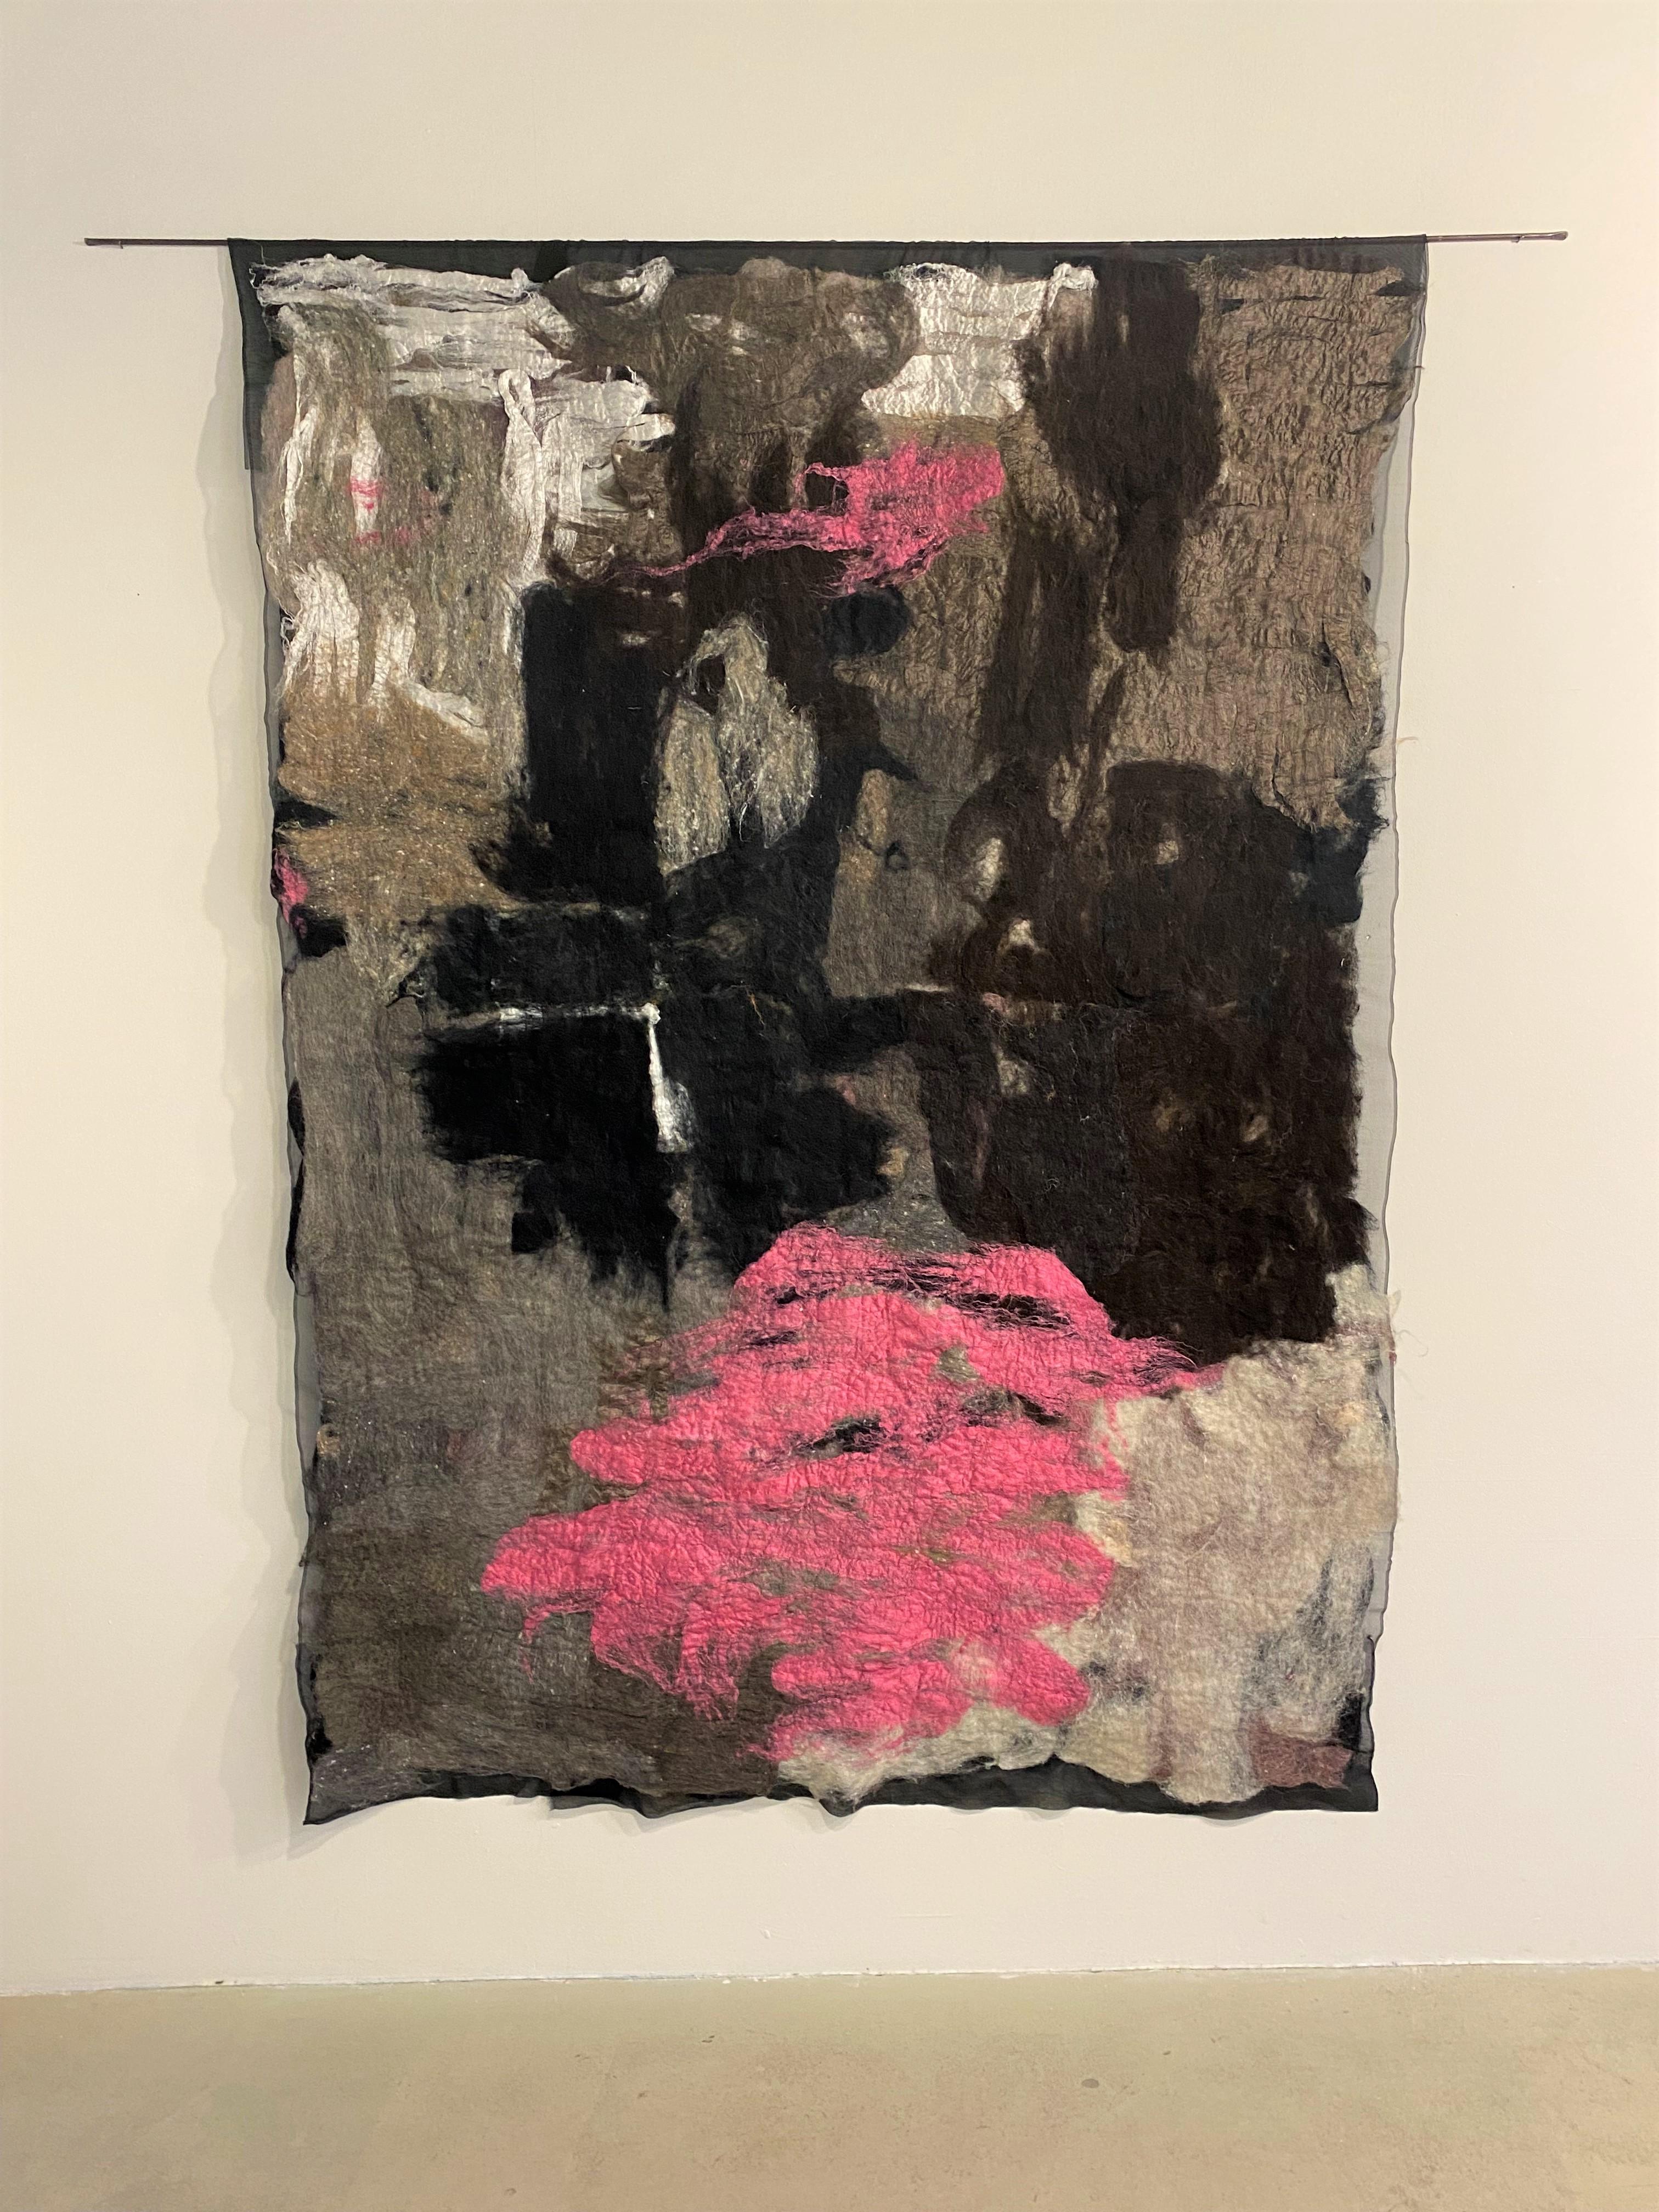 Materials: Drenth Heath, Raw Silks, Merino, Silk Organza

Claudy Jongstra is known worldwide for her monumental artworks
and architectural installations, whose organic surfaces and nuanced
tones reflect Jongstra’s masterful innovations in the